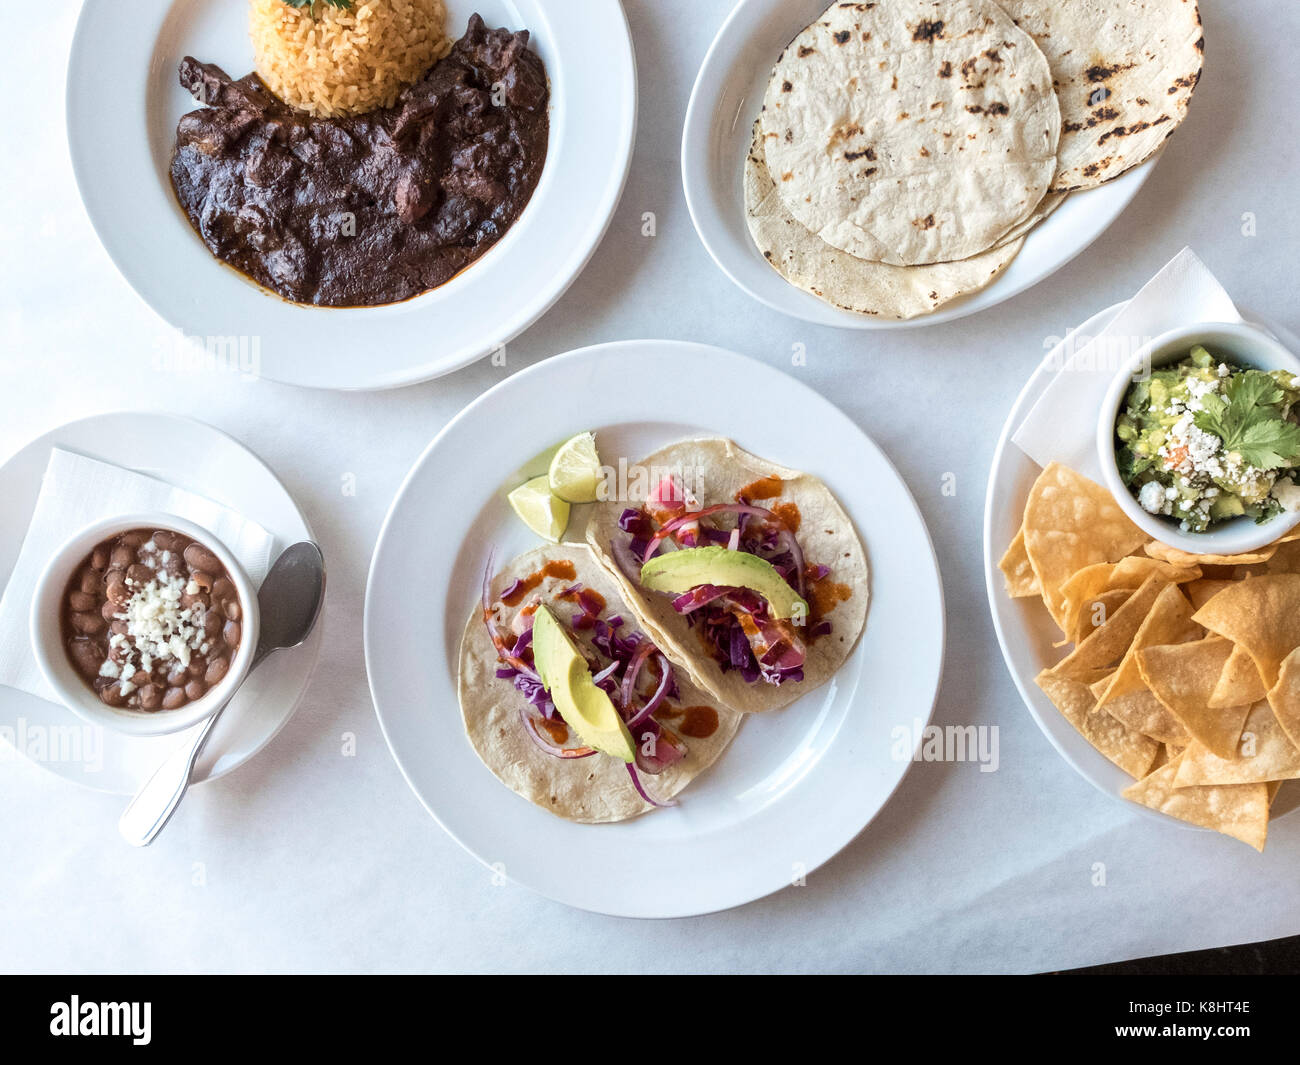 Overhead view of food served in plates on table Stock Photo